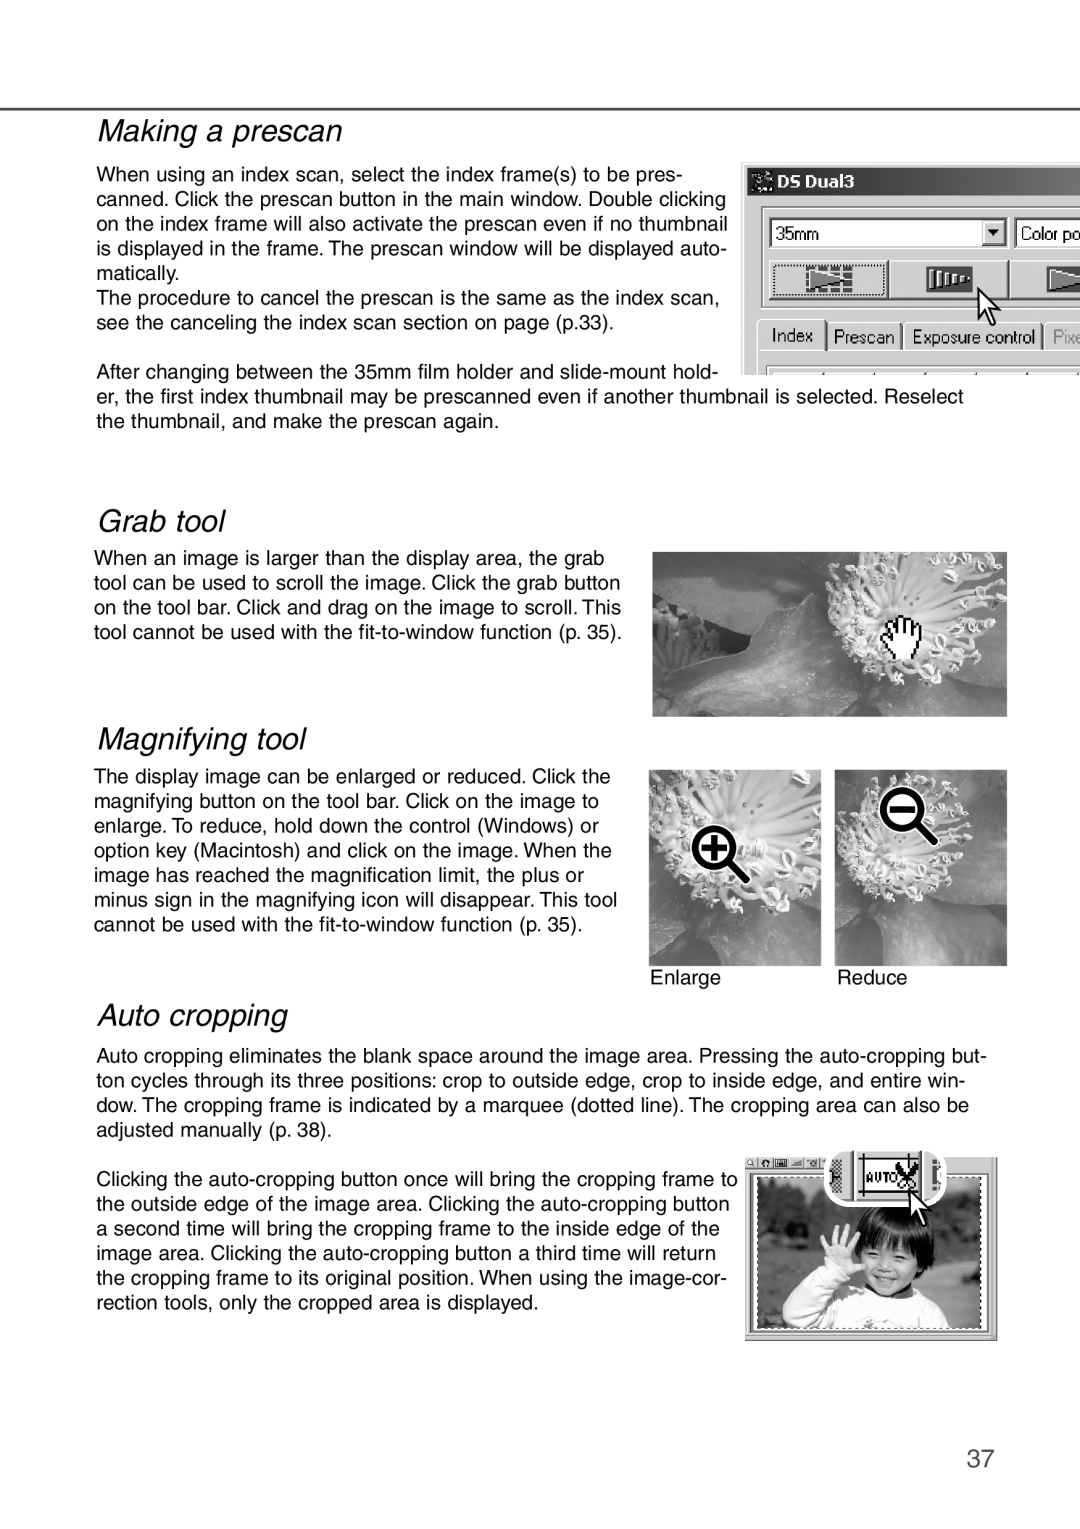 Konica Minolta AF-2840 instruction manual Making a prescan, Grab tool, Magnifying tool, Auto cropping 